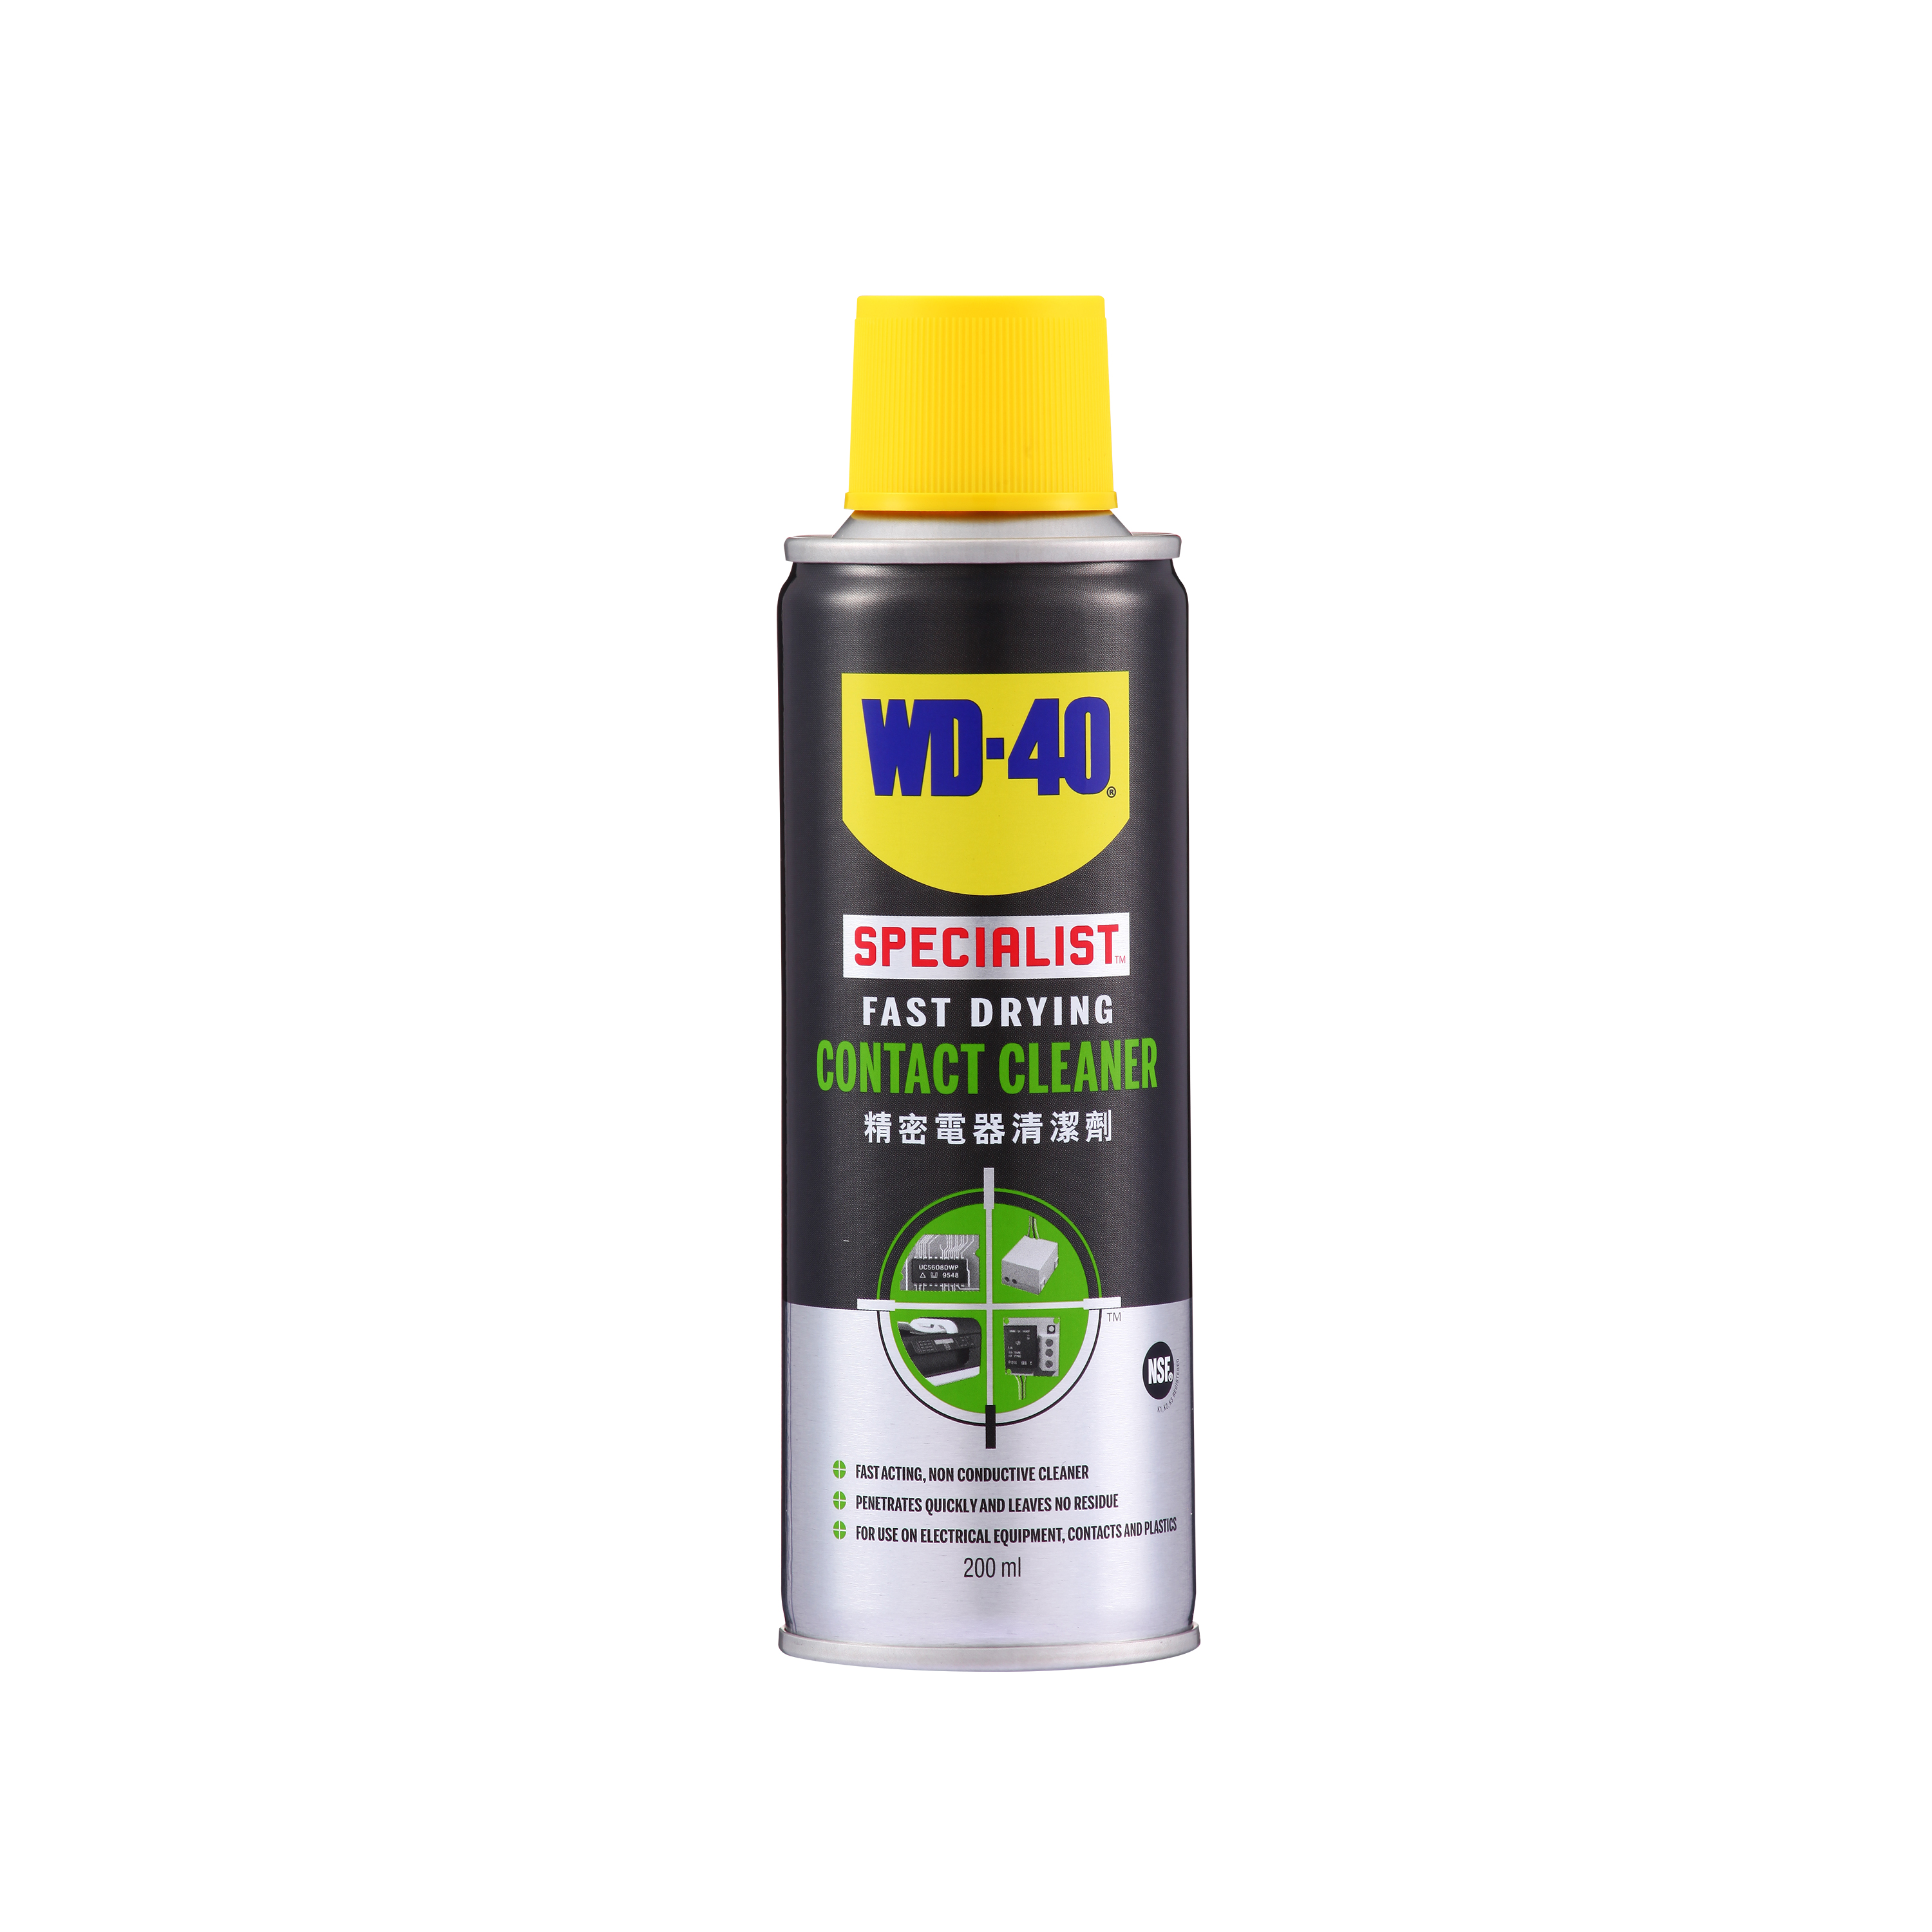 WD 40 Fast drying contact cleaner